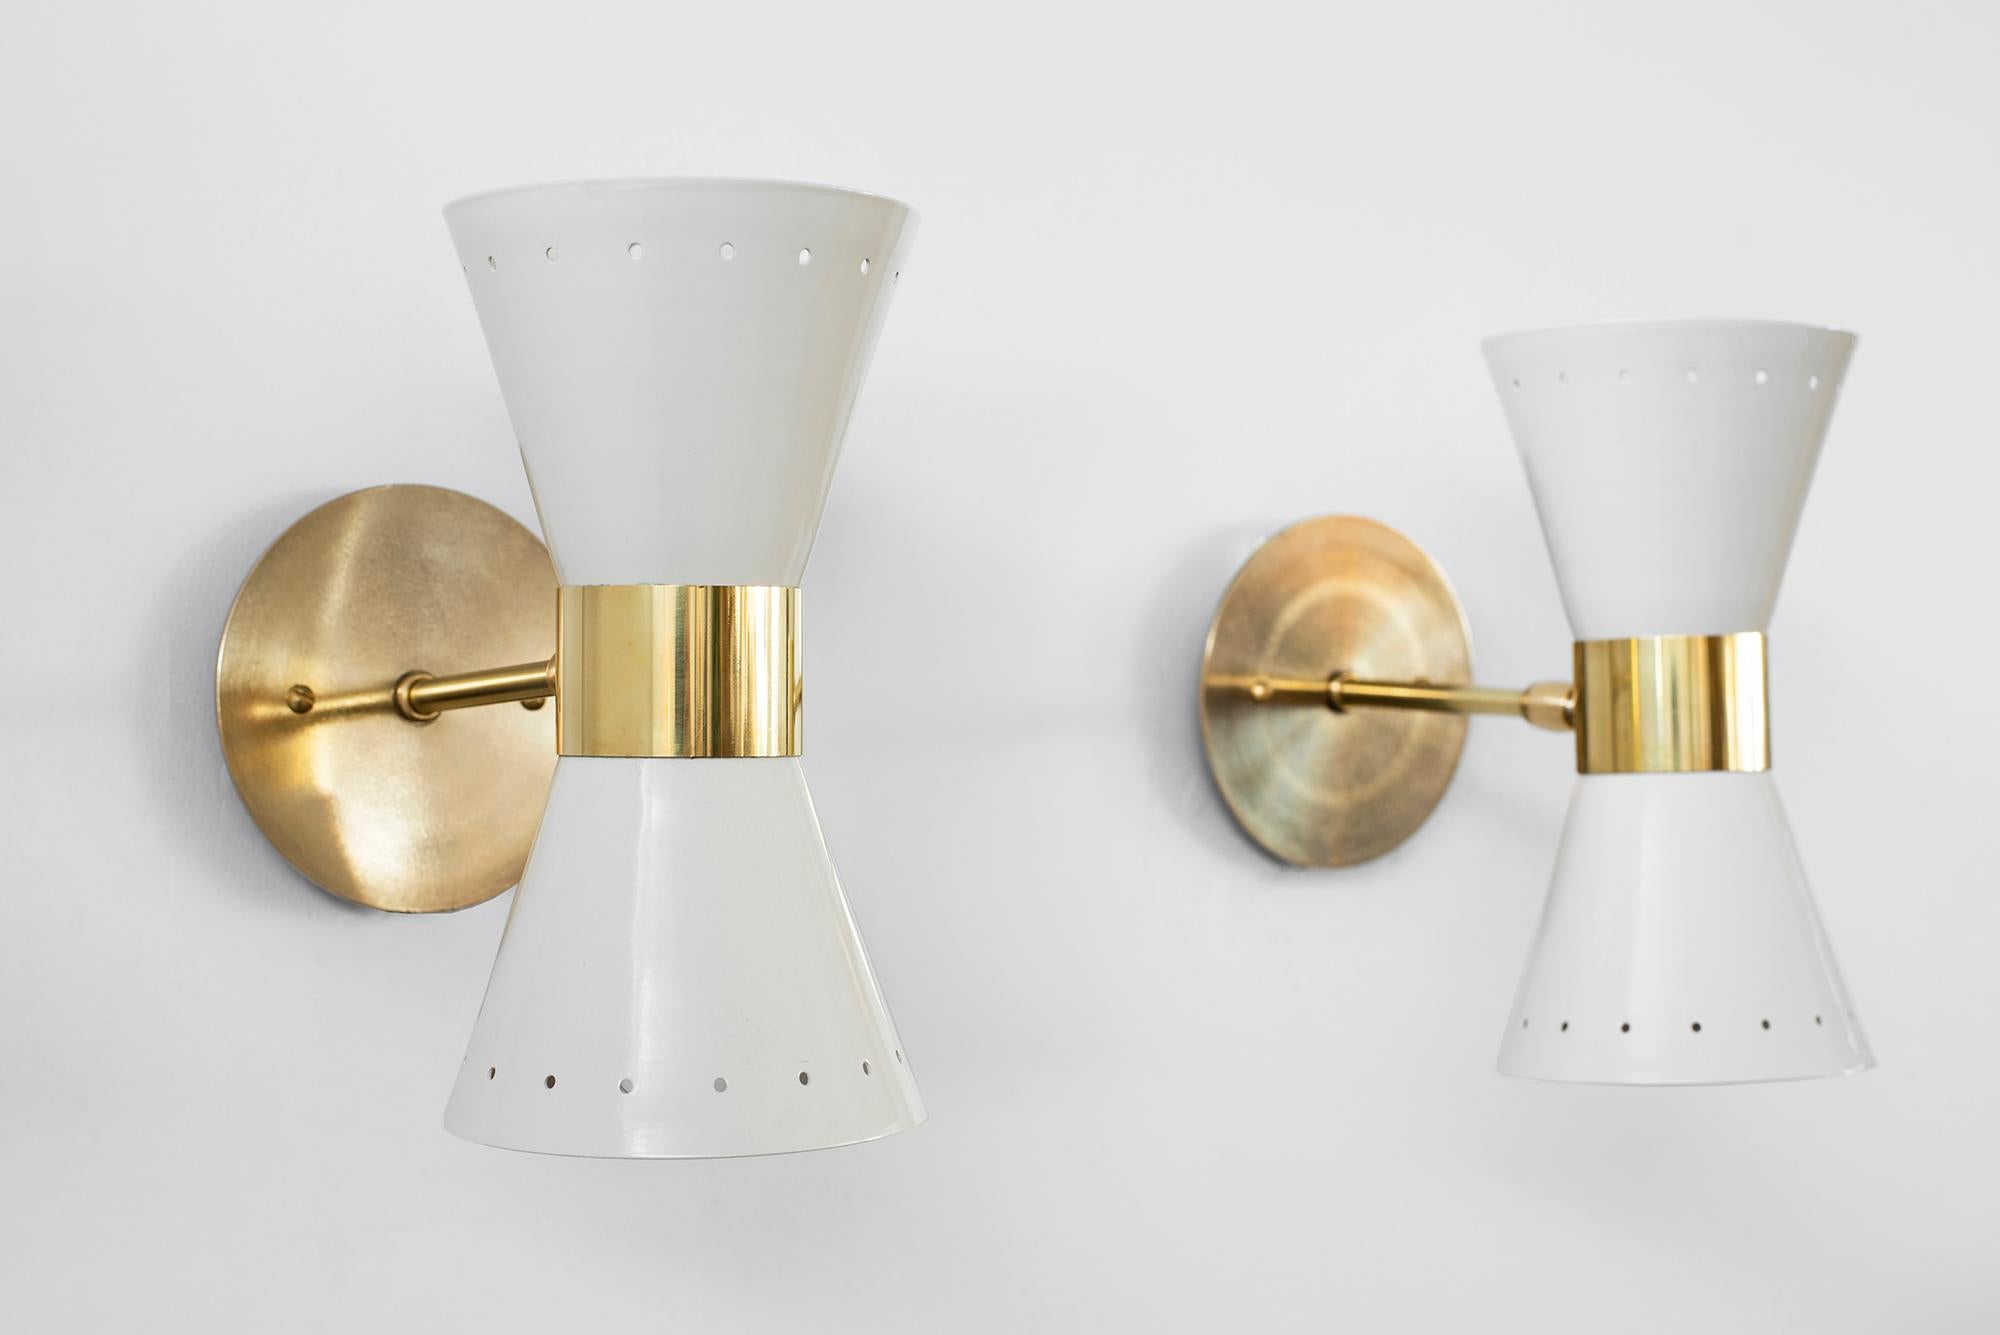 Petite in scale, metal sconces in the style of Stilnovo, newly produced in Italy. 
Creamy white perforated metal shade with brass detailing and back-plate.
Sconces shine both up and down light.
Wired to American standards.

Measures: W 4